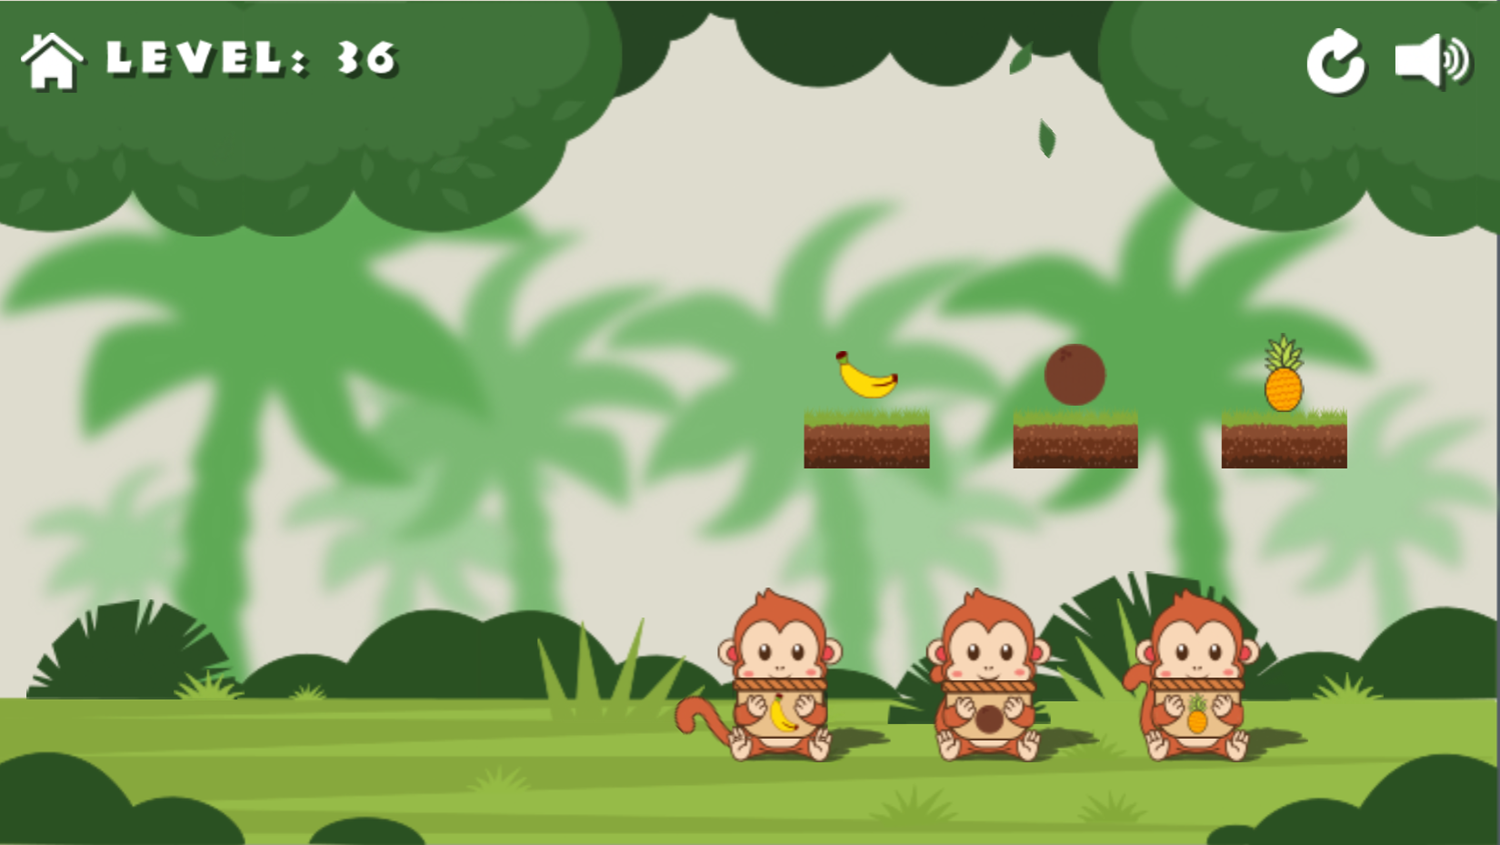 Monkeys and Fruits Game Final Stage Screenshot.